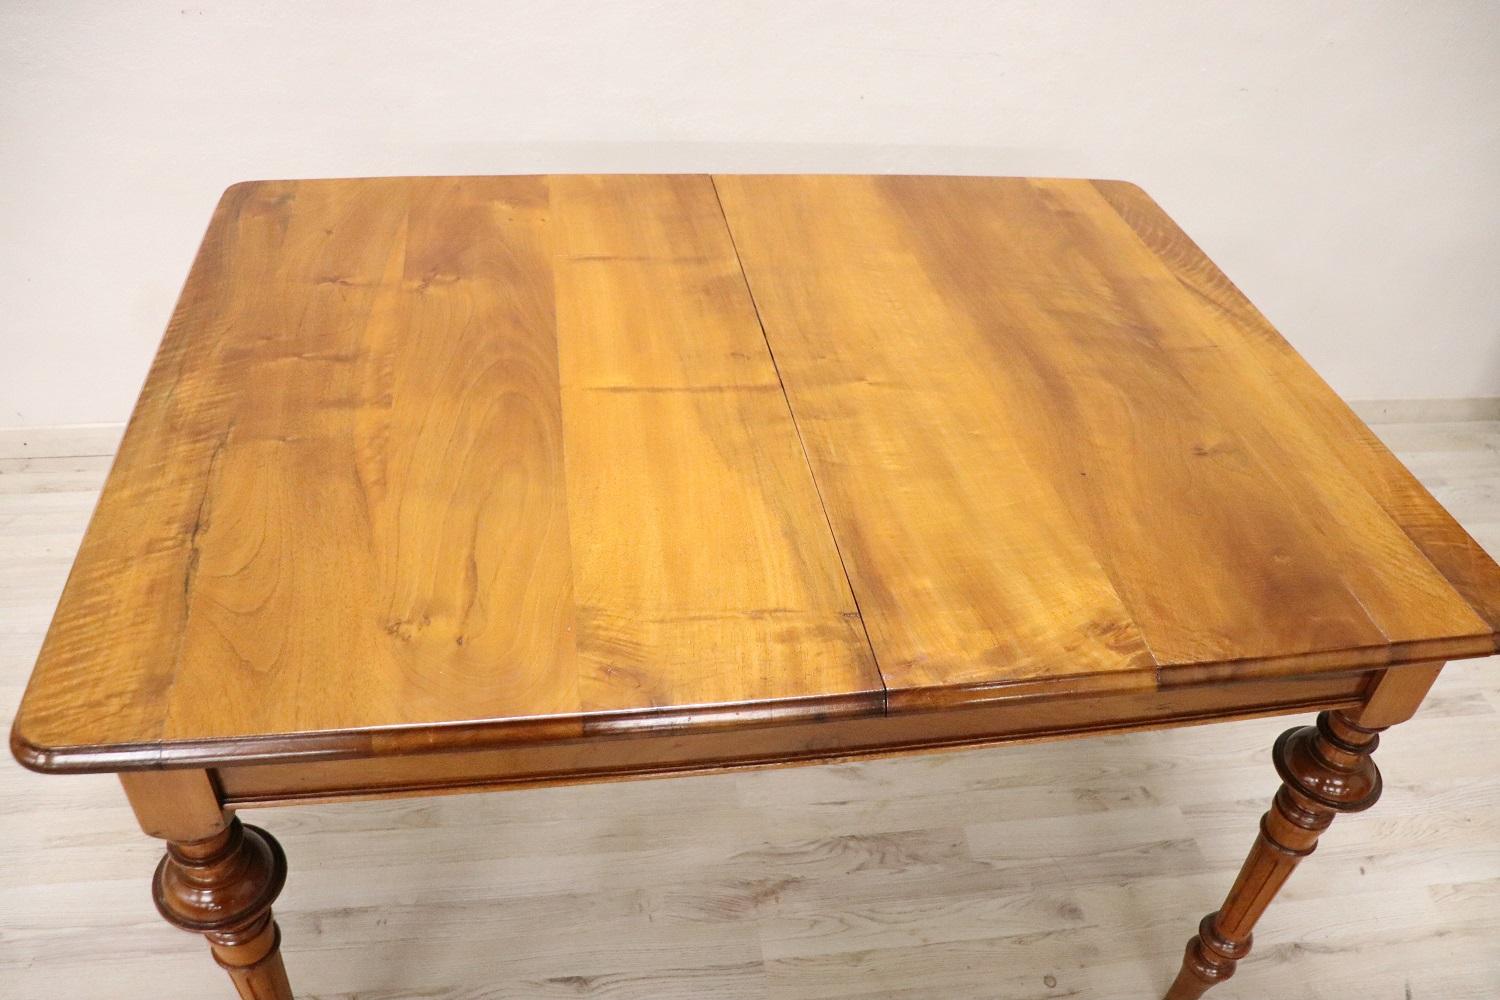 Carved 19th Century Italian Solid Walnut Extendable Antique Dining Room Table